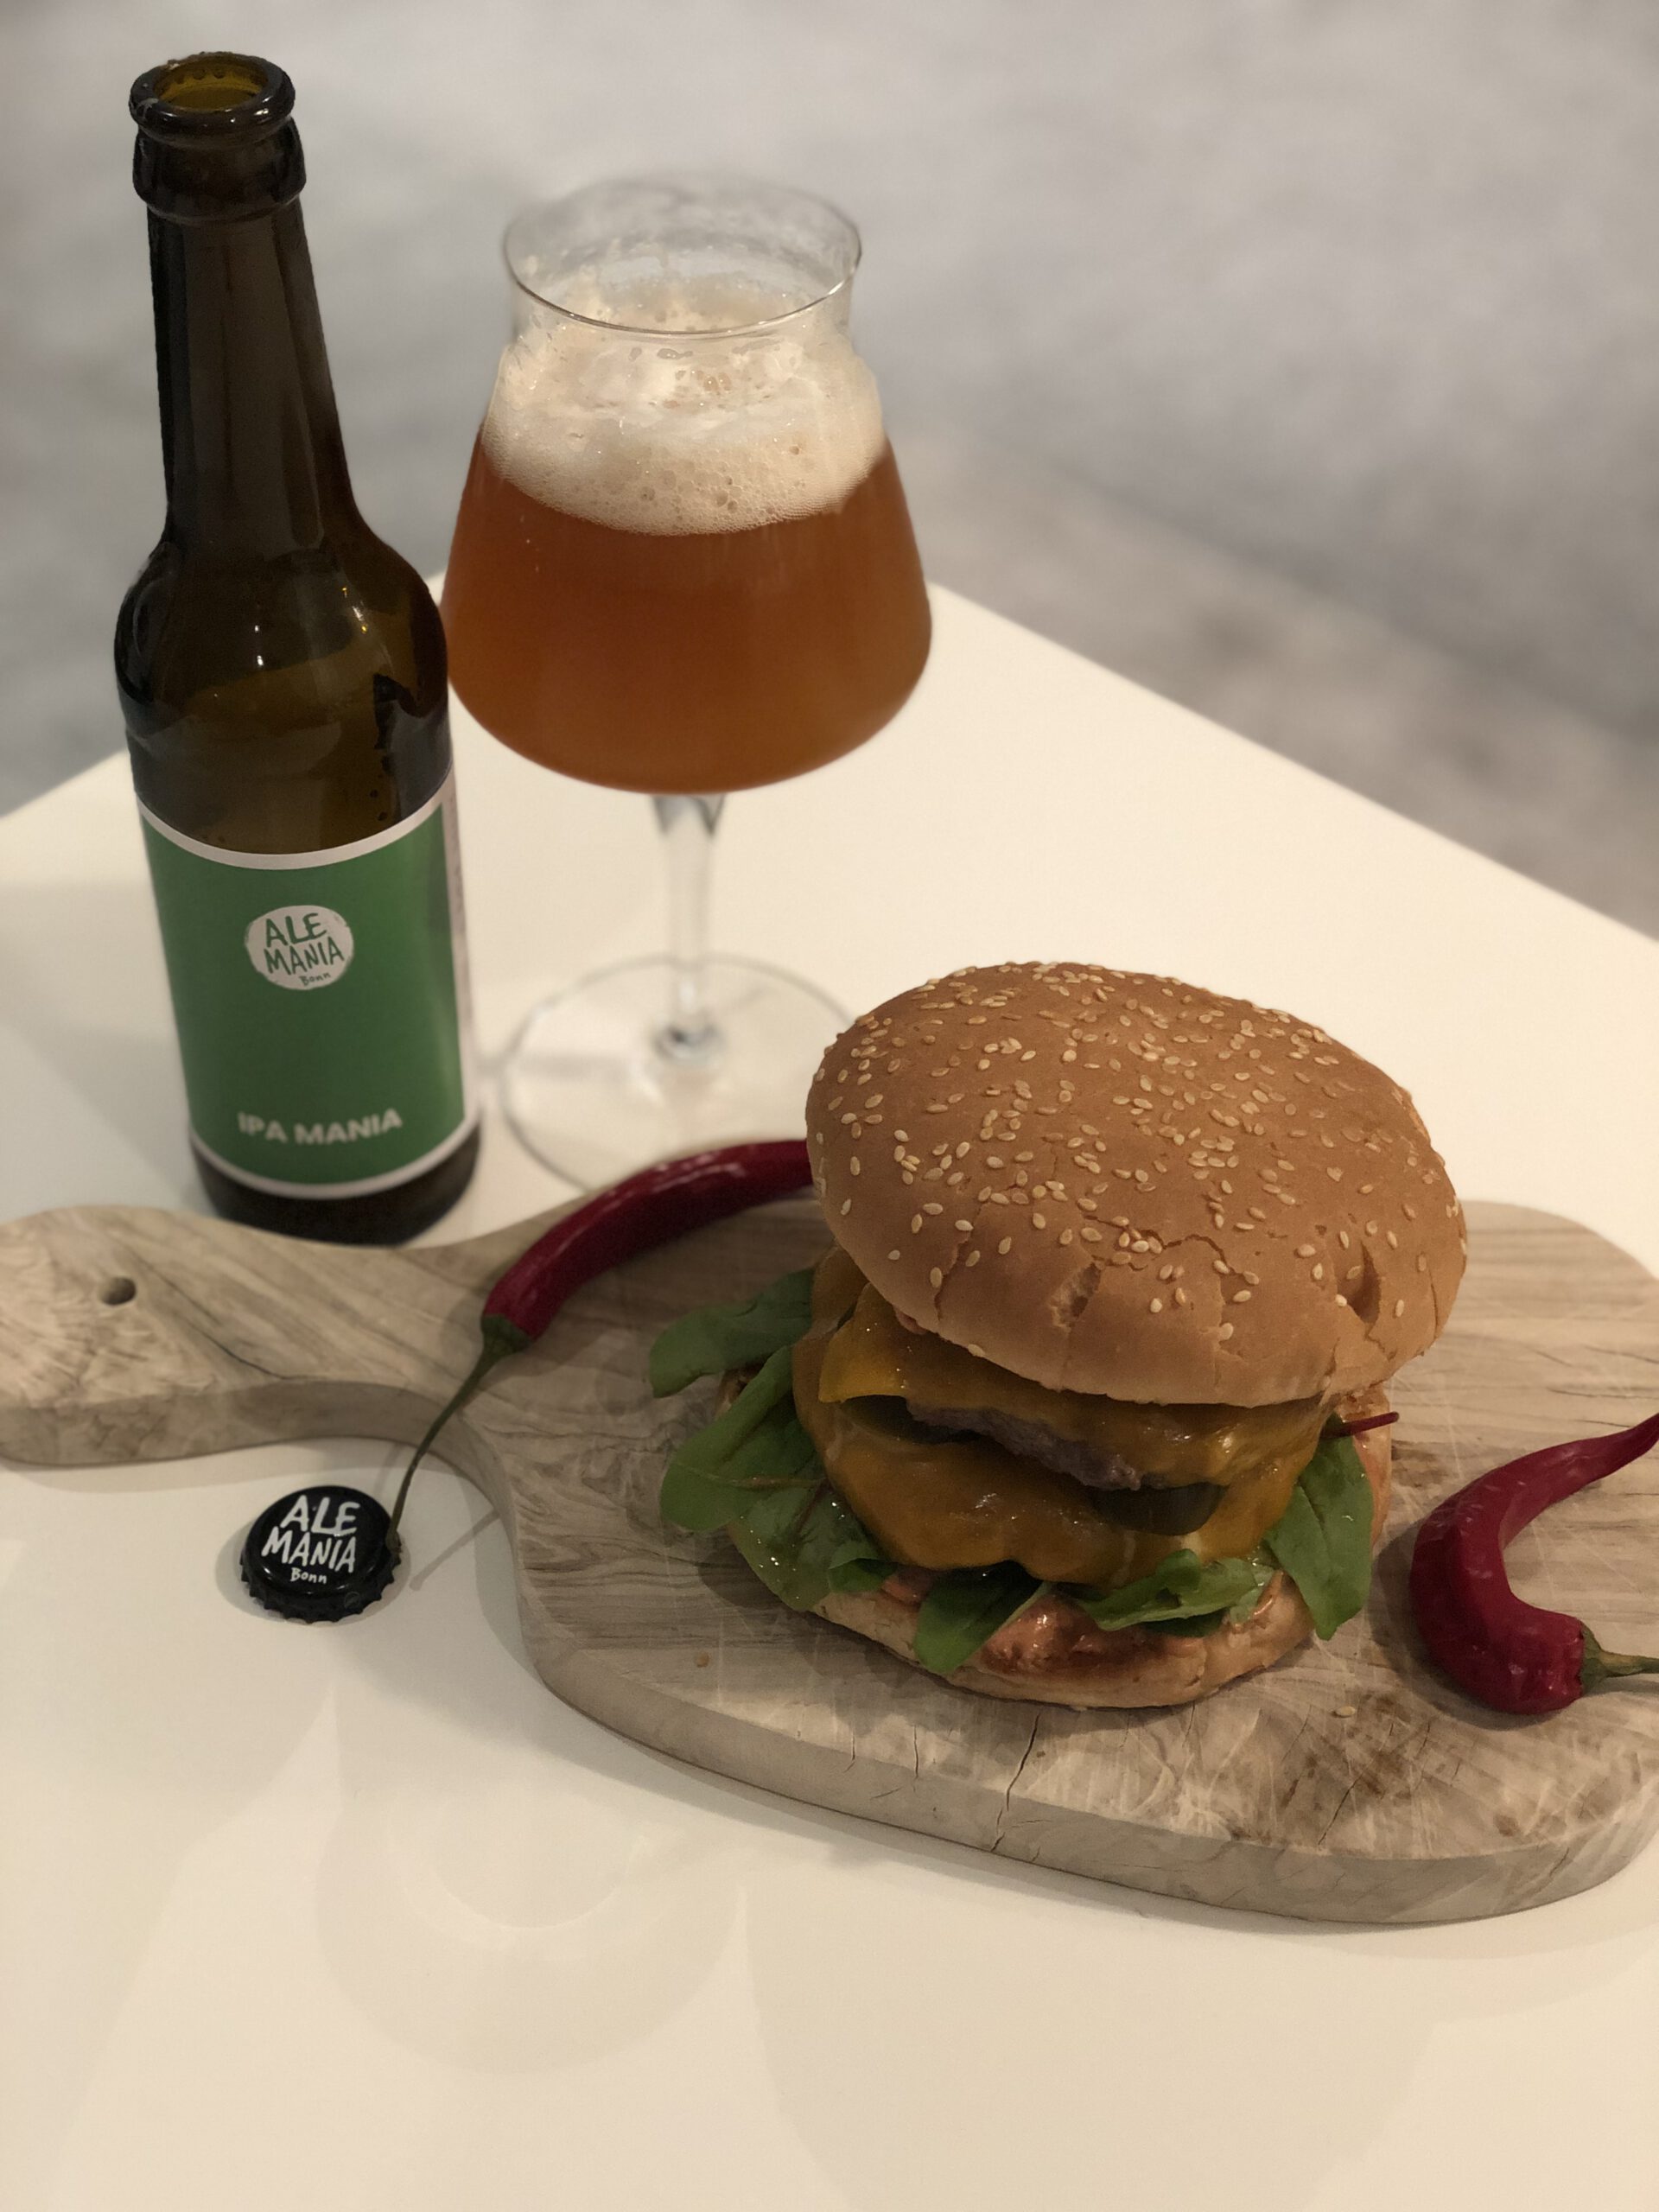 Chilli cheese burger dates an India Pale Ale